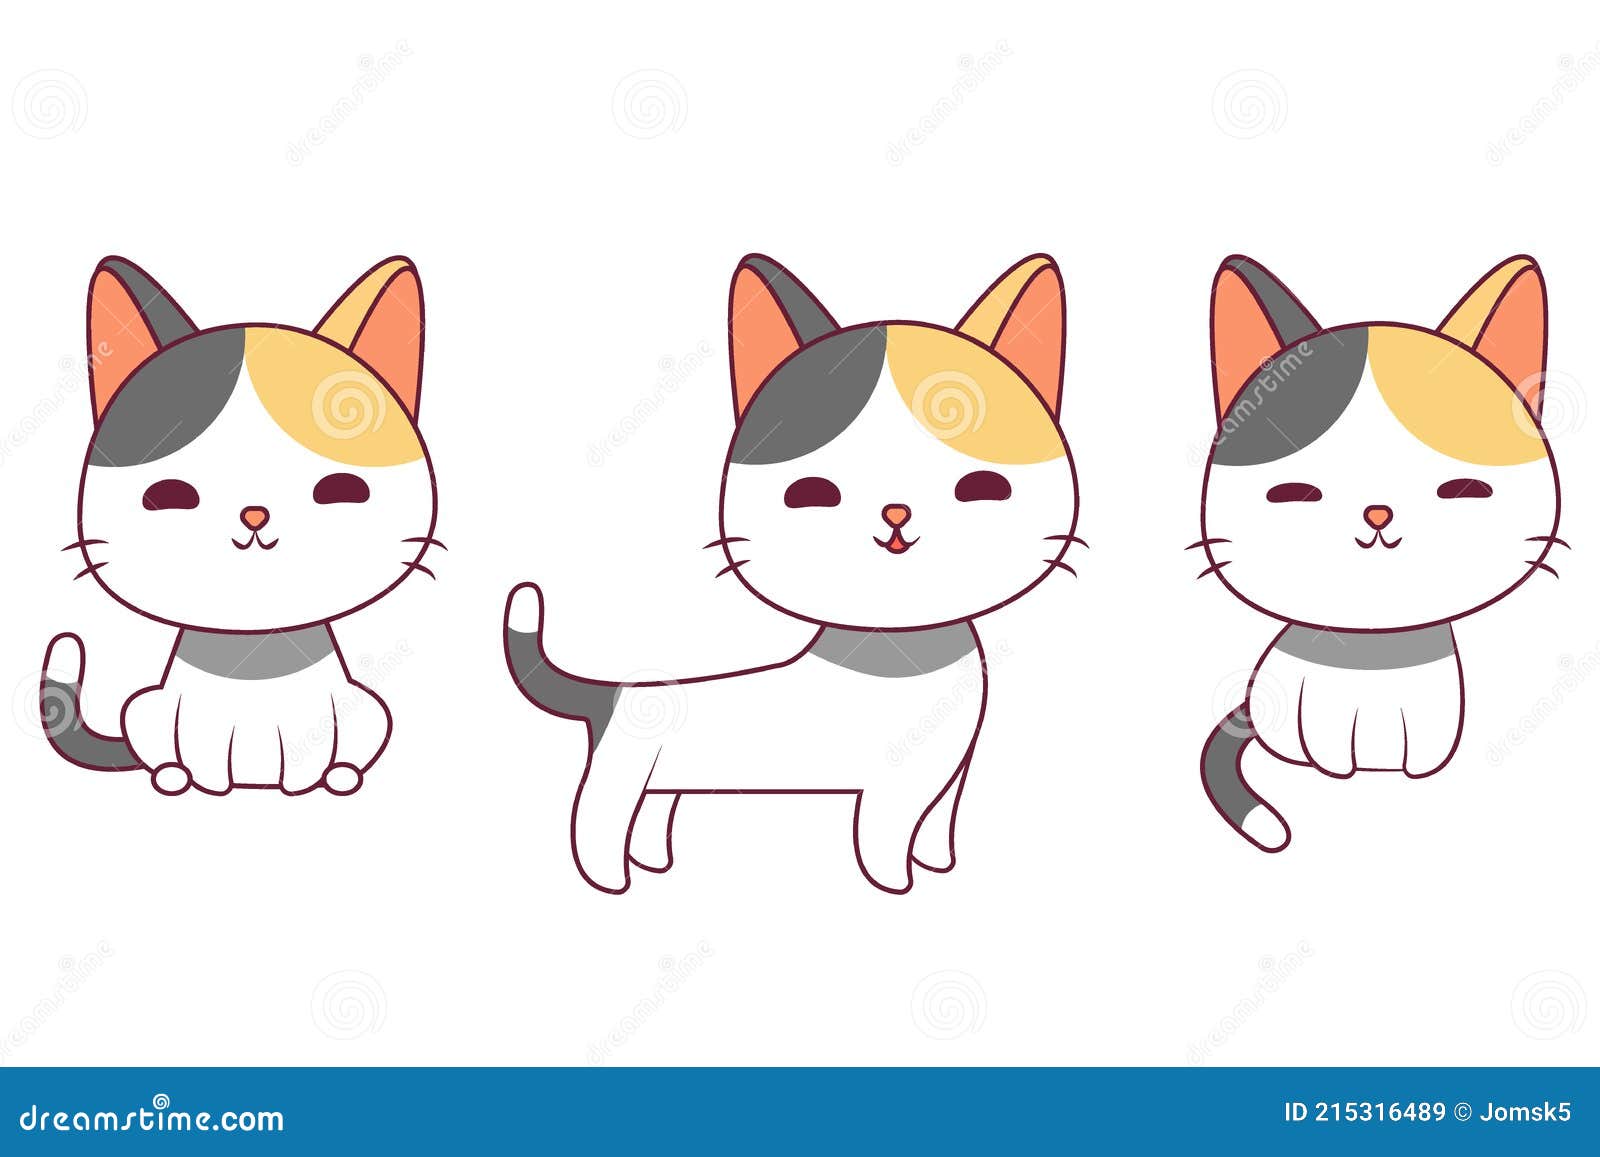 Multicolored Cute Cat Drawing Set in Different Poses Stock Vector ...